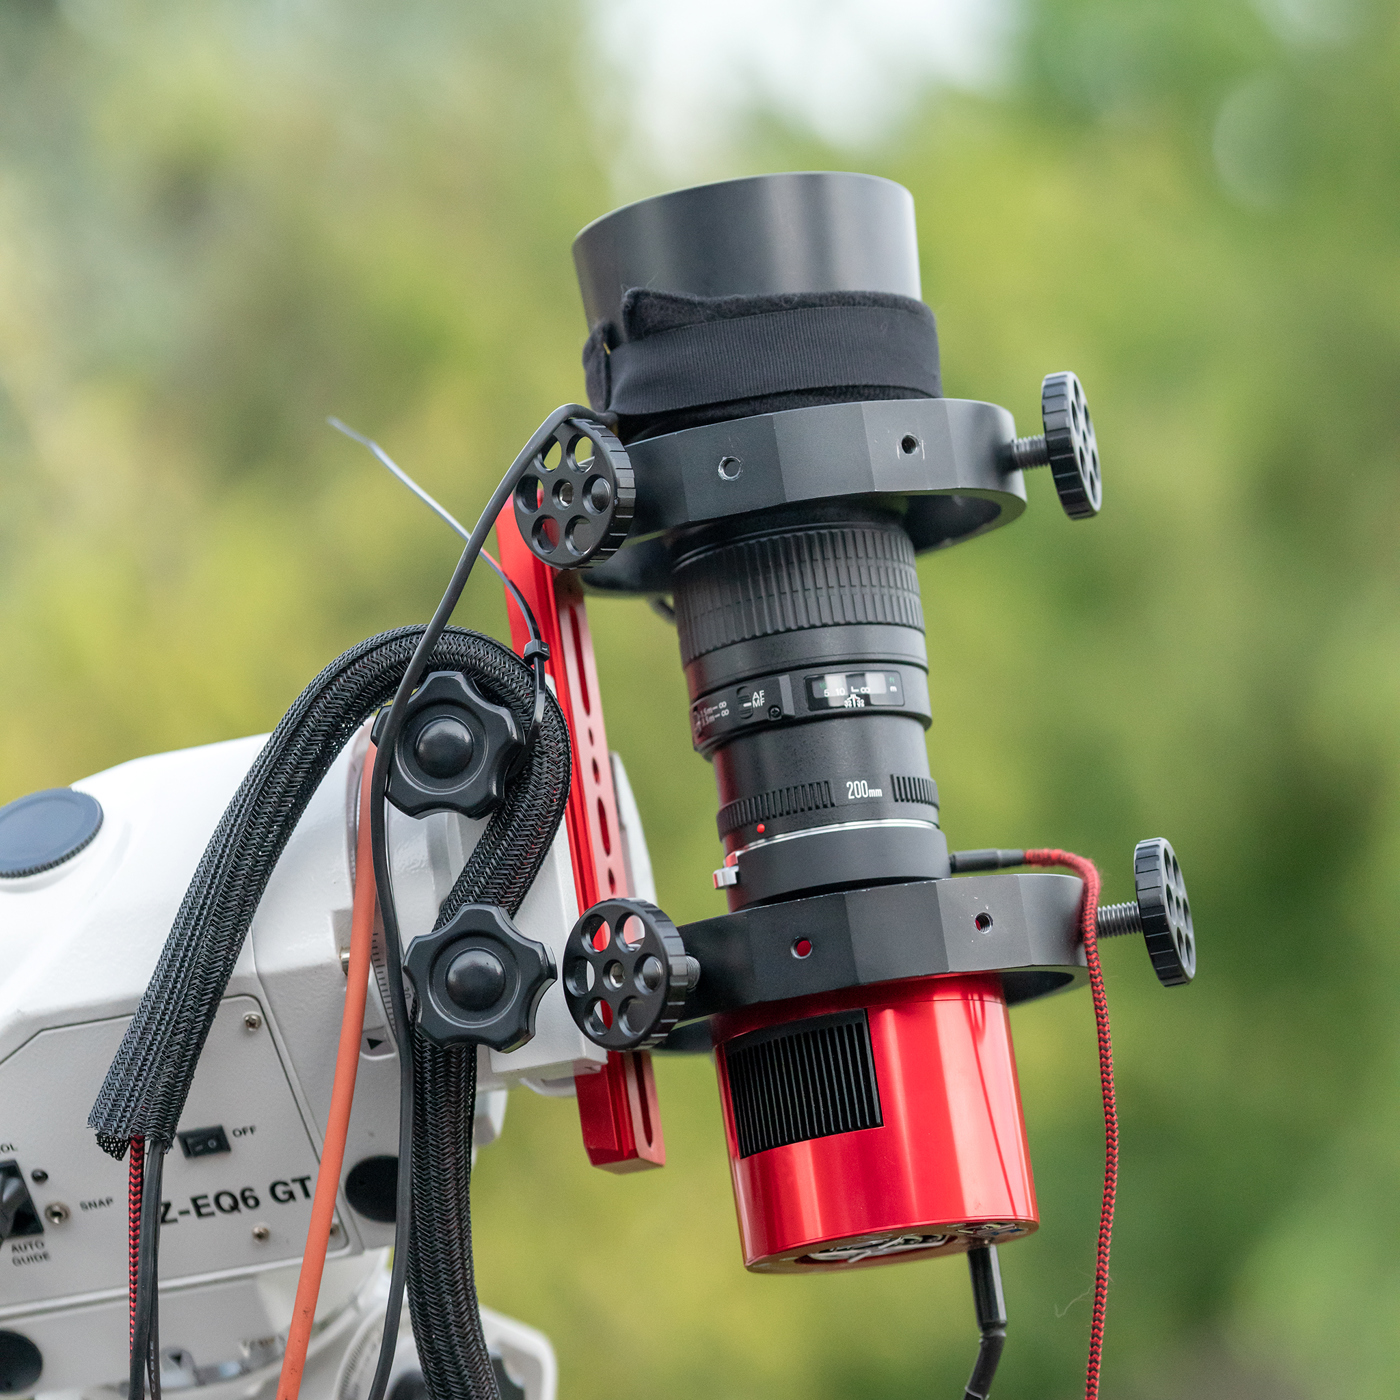 Canon 200mm 2.8 lens mounted on a Skywatcher AZEQ6 